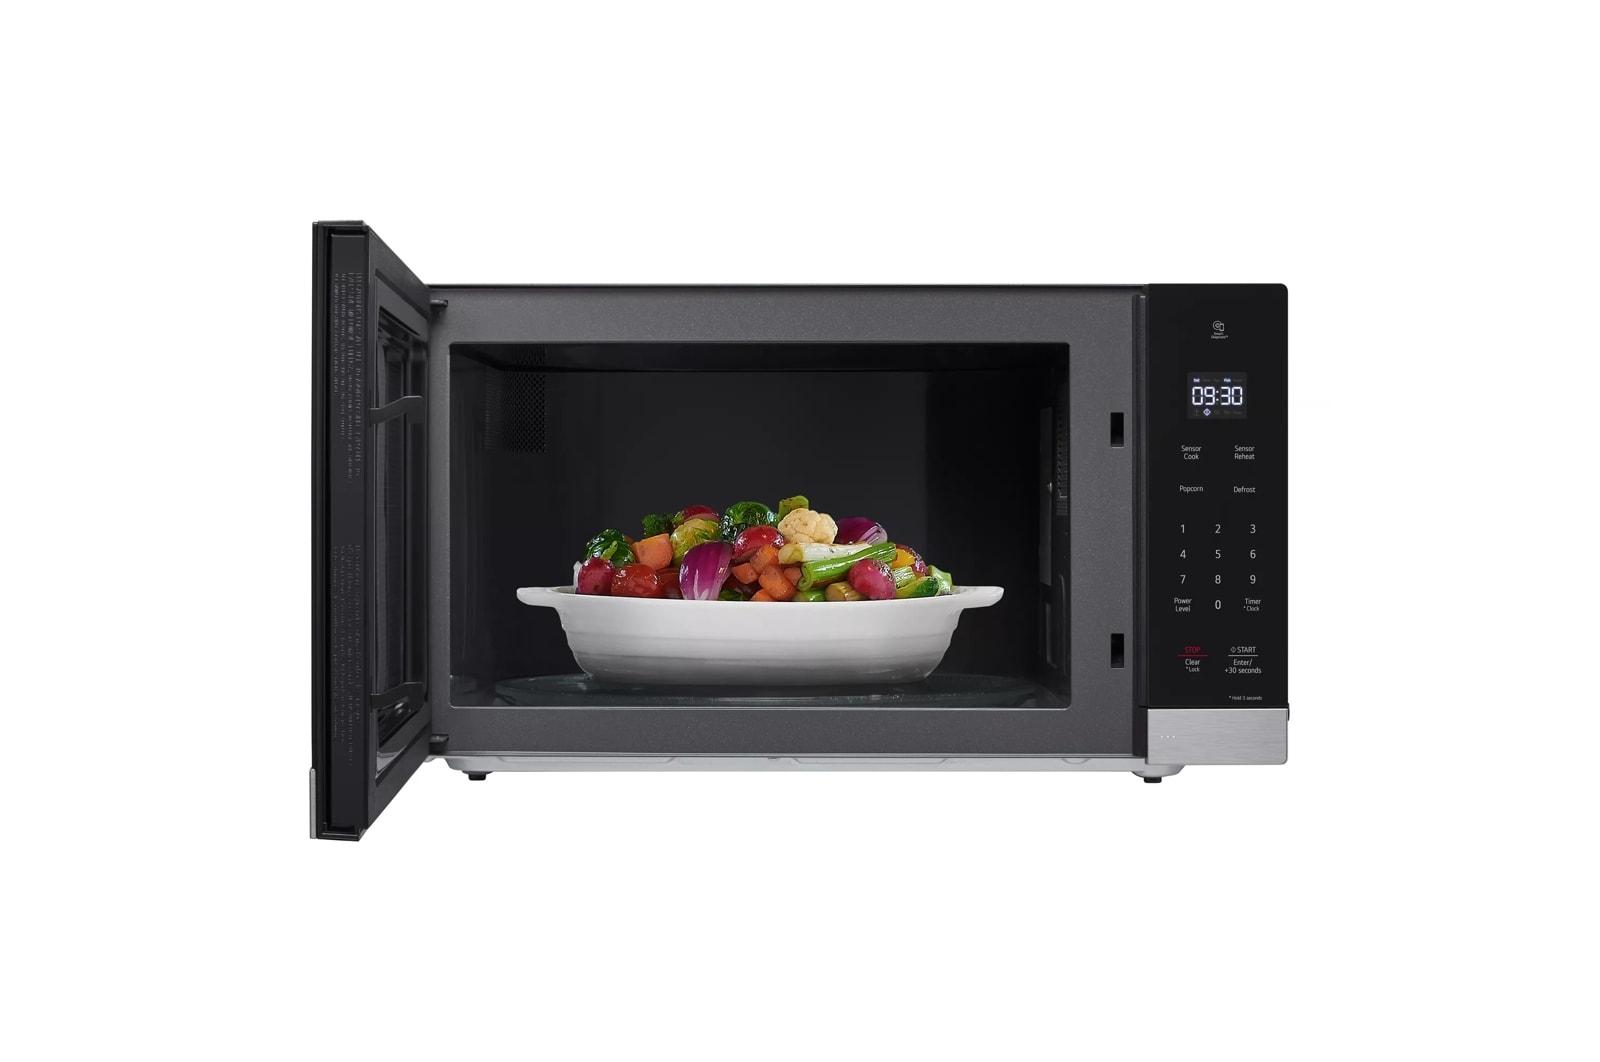 Lg 2.0 cu. ft. NeoChef™ Countertop Microwave with Smart Inverter and Sensor Cooking